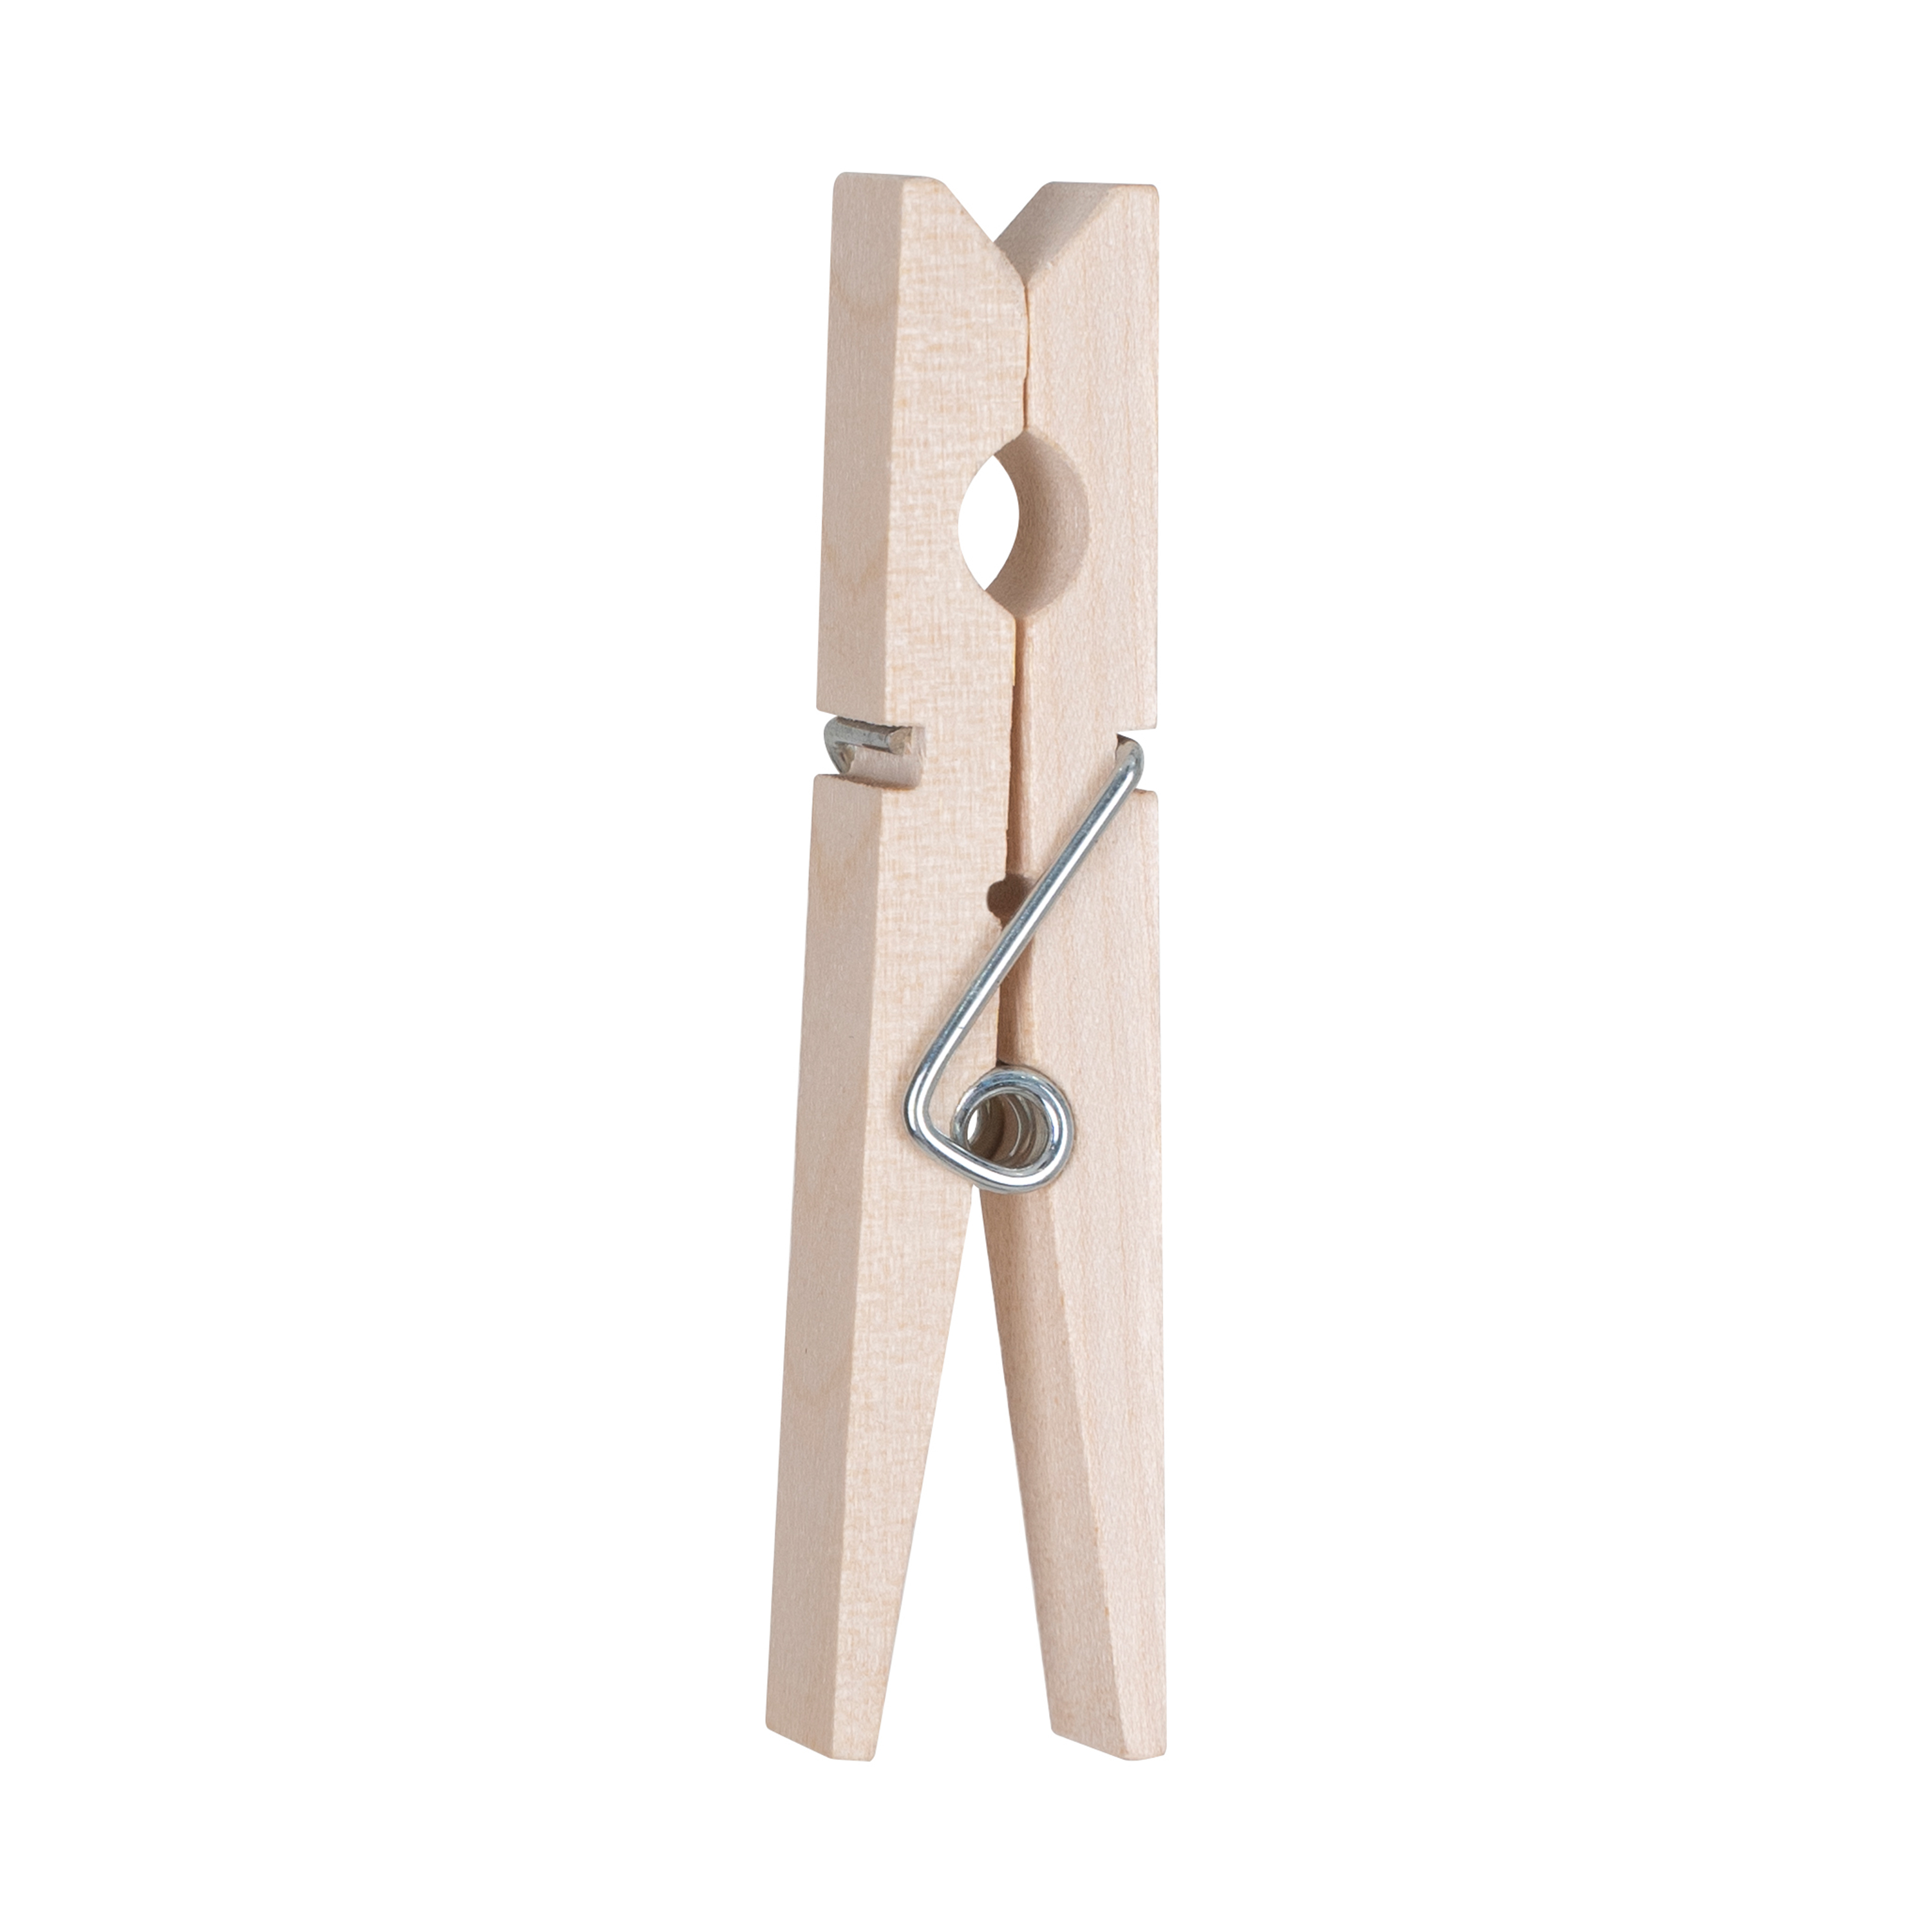 Mainstays Wood Clothes Pins, Beige, 50 Count - image 4 of 7